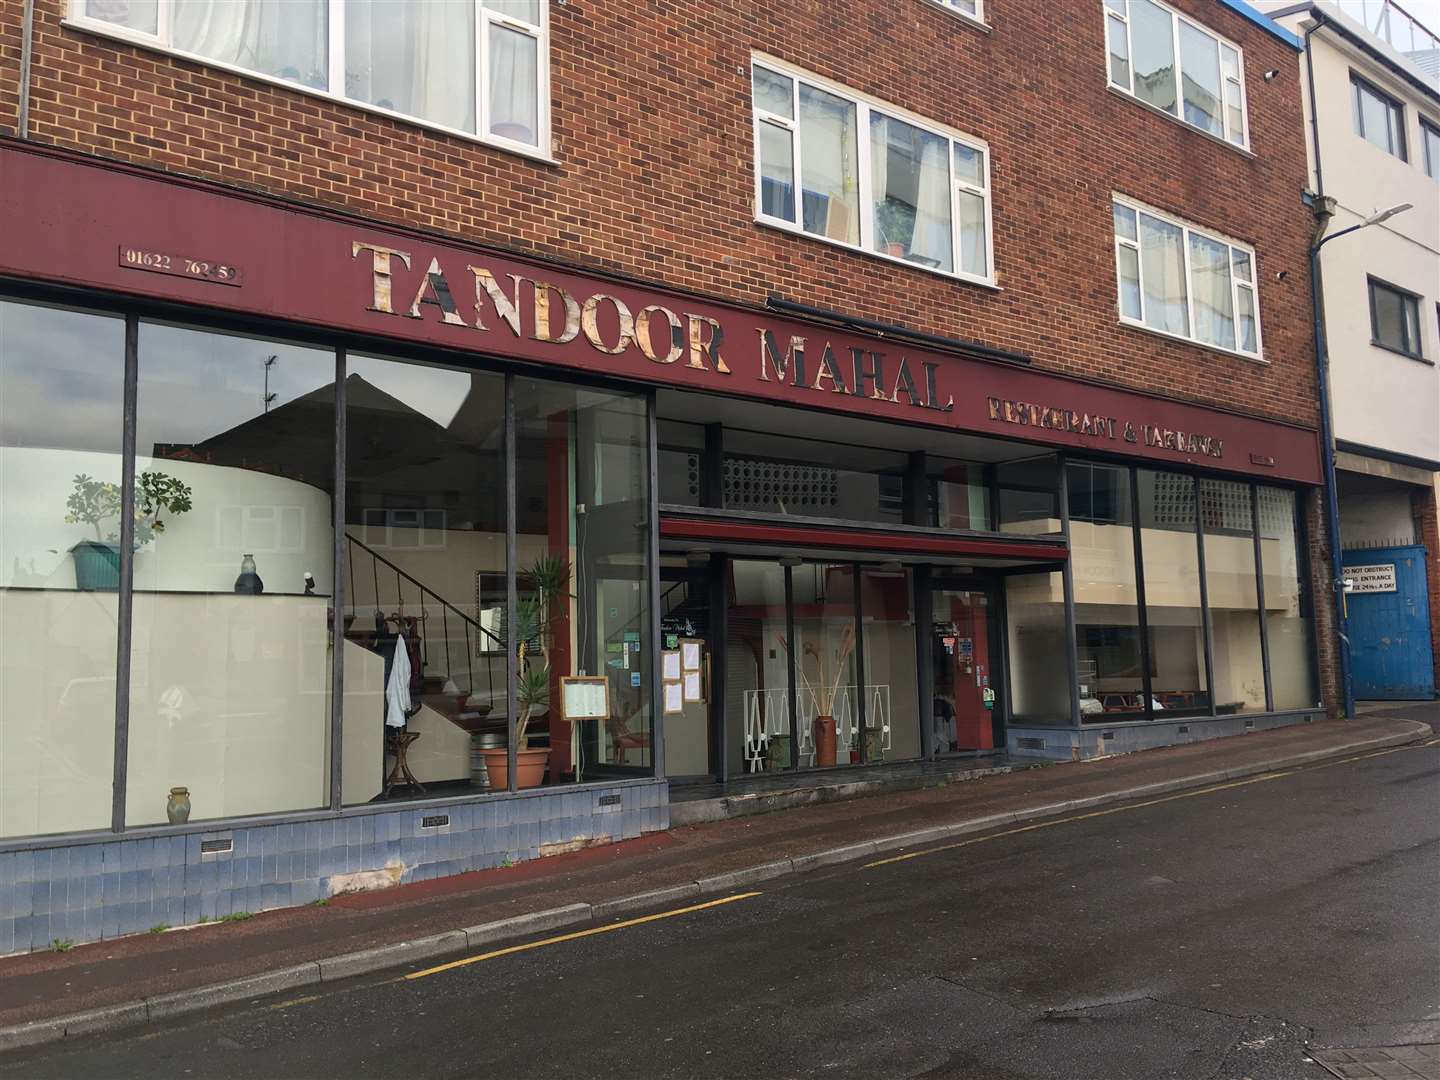 Tandoor Mahal in Medway Street, Maidstone has been served with a hygiene emergency prohibition notice (28926898)